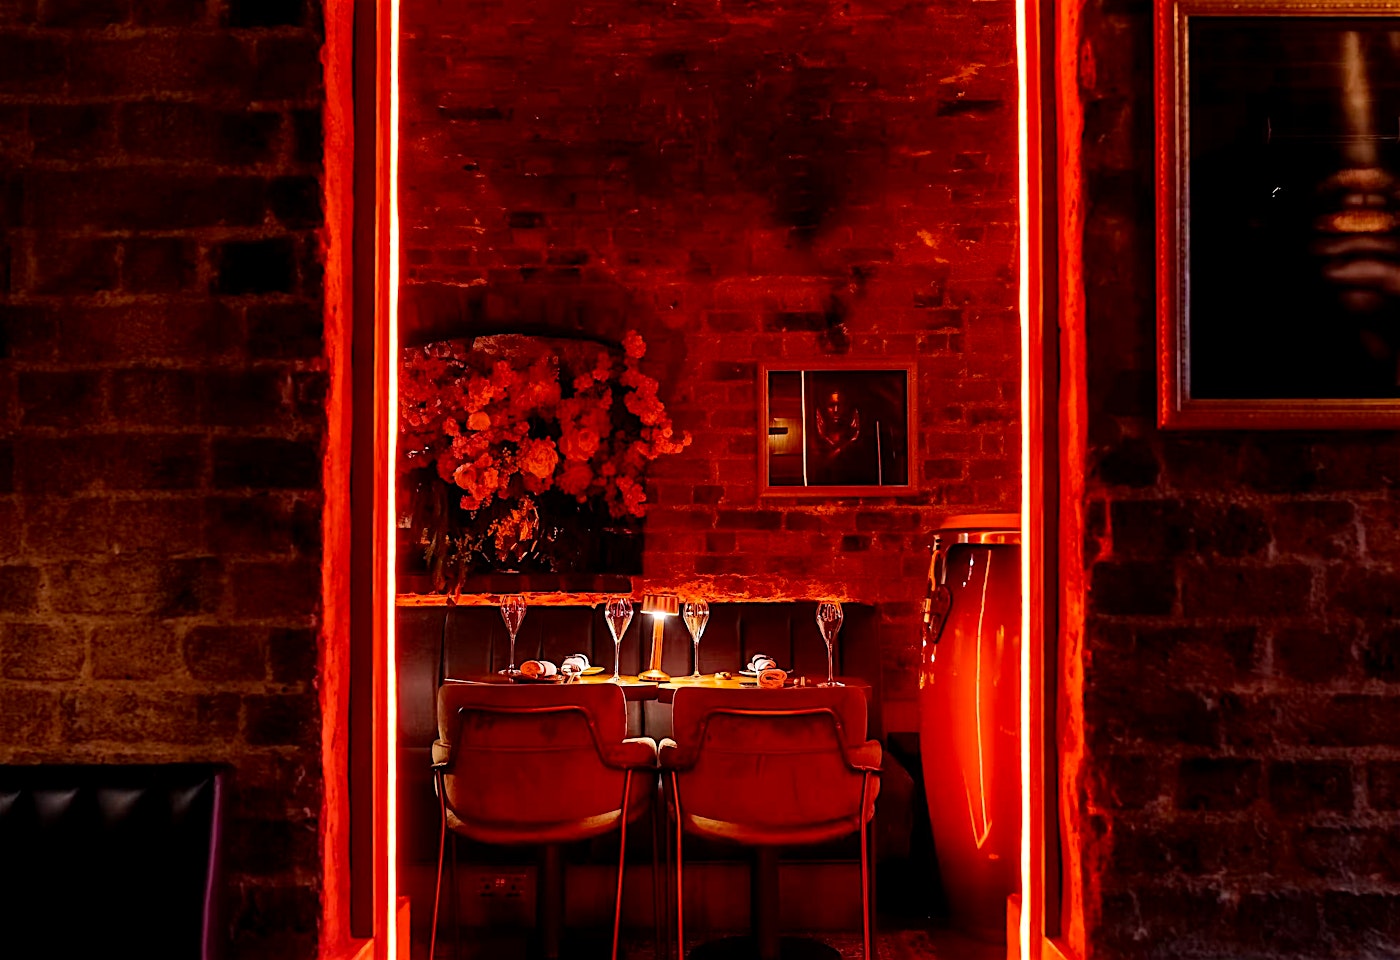 Dramatic lighting in this Covent Garden cocktail bar